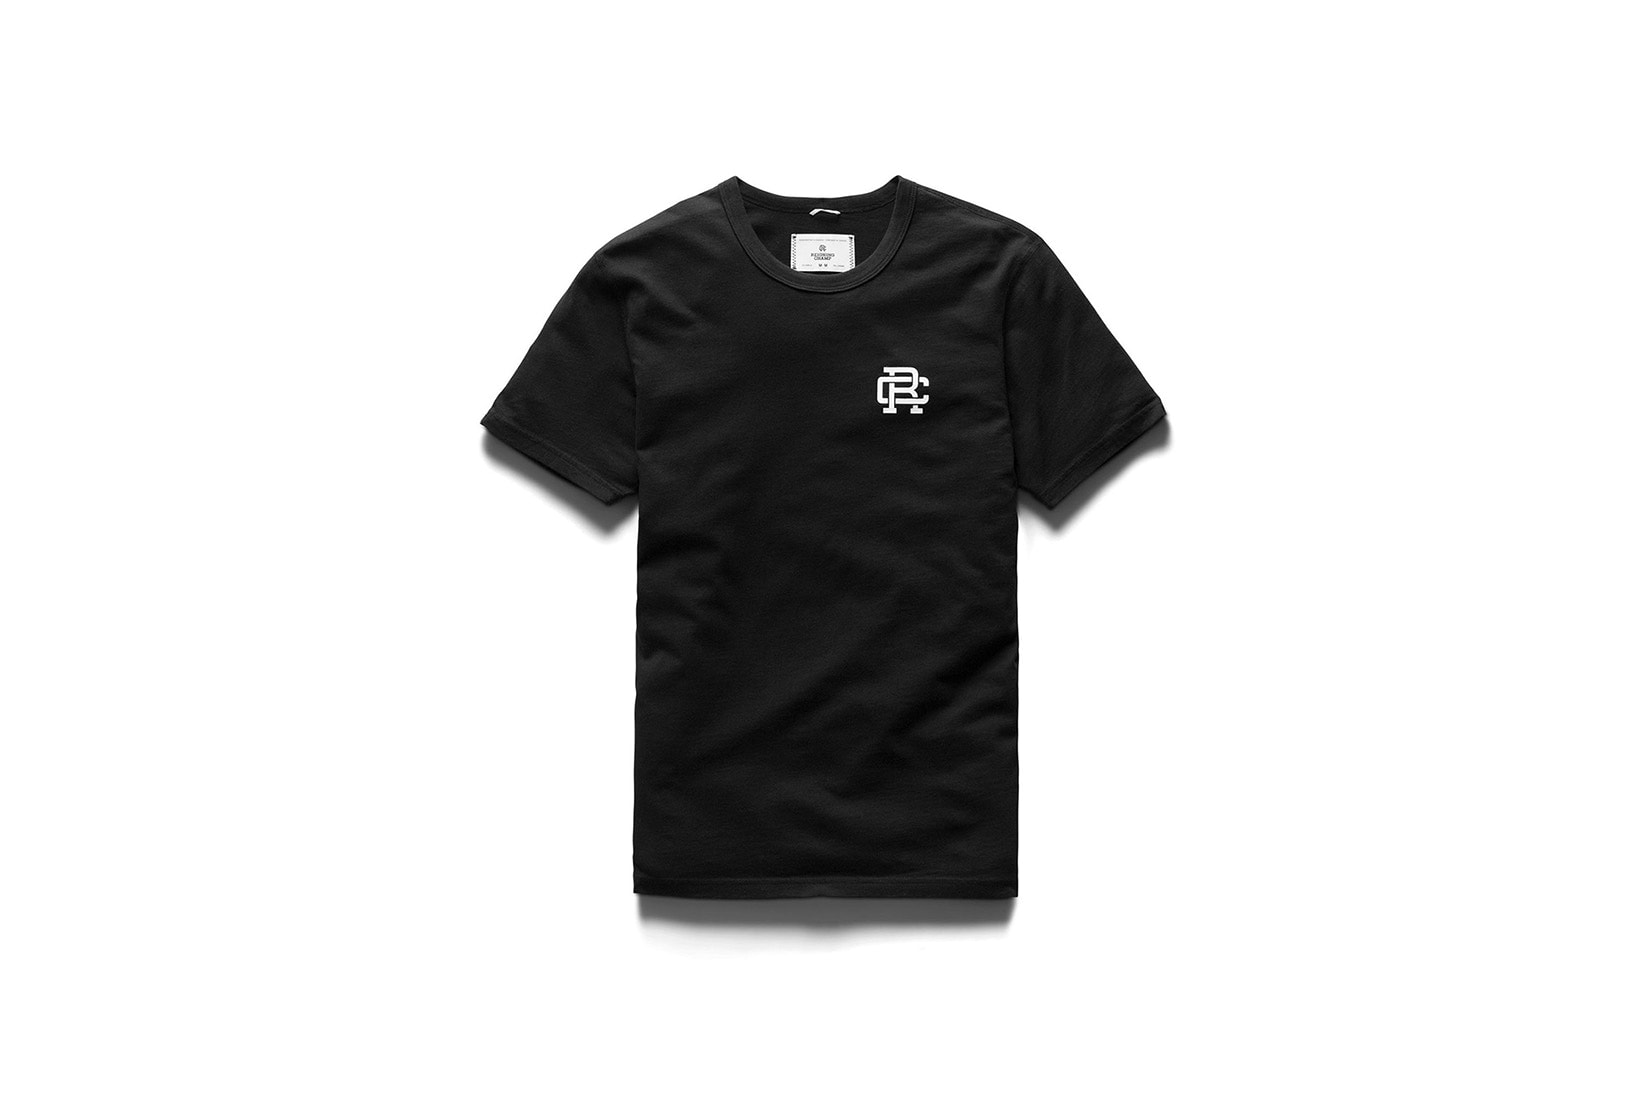 Reigning Champ 十周年別注「One Decade. No Compromise」系列